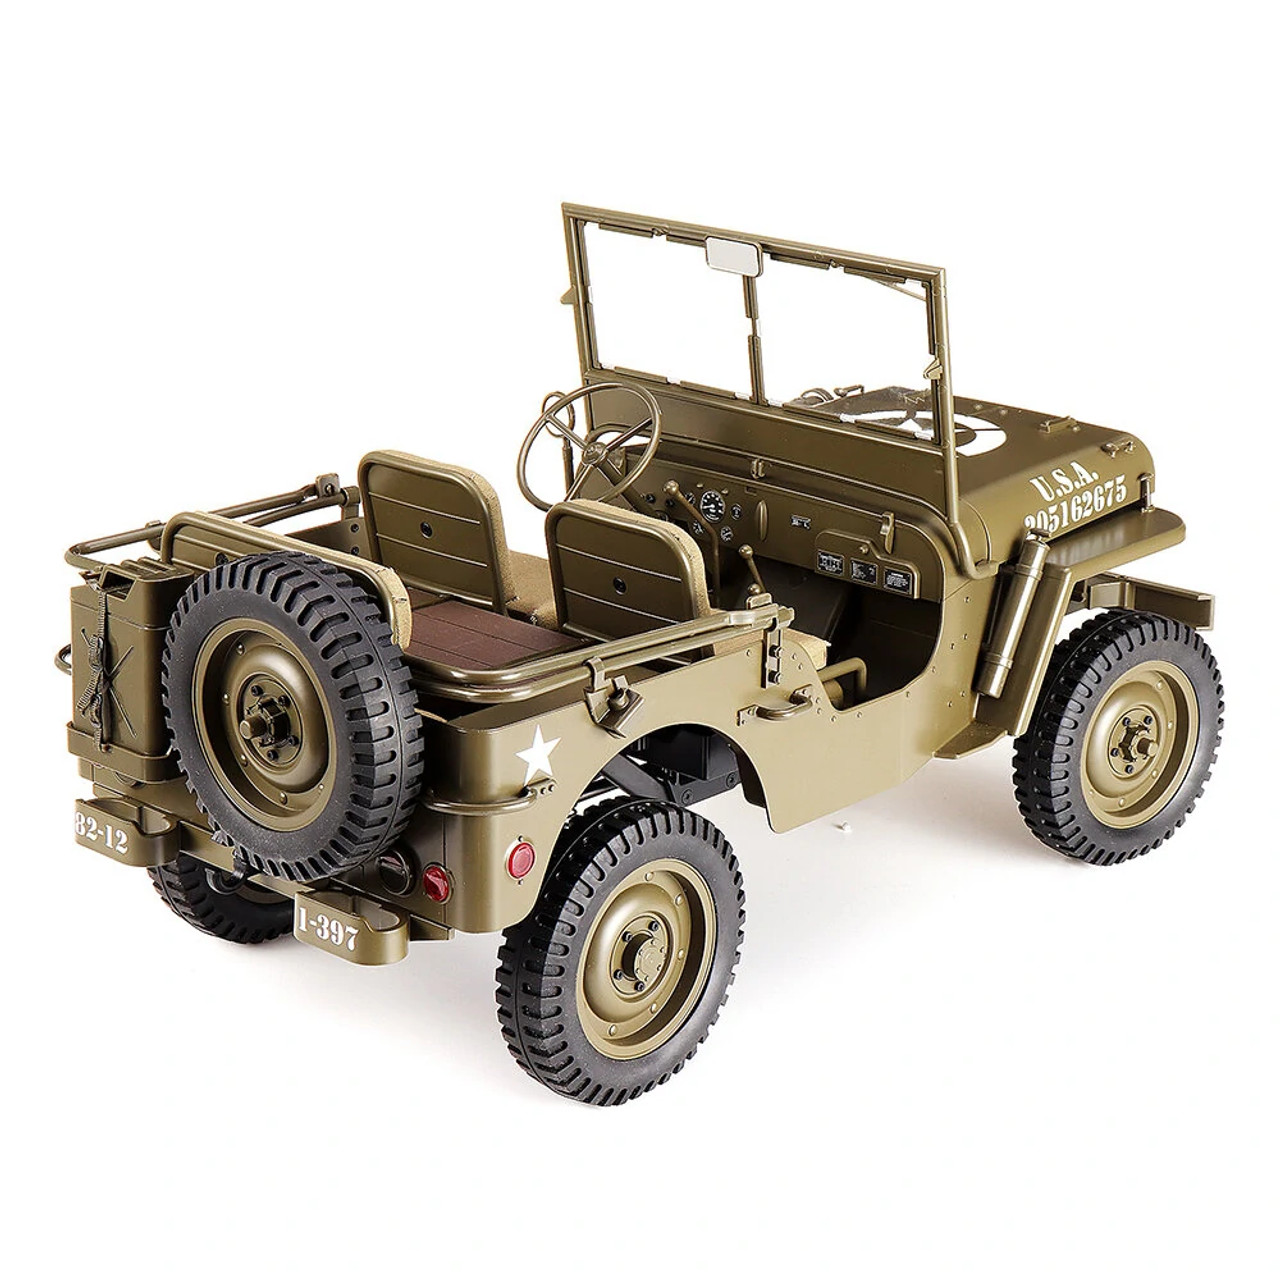 RocHobby RC Car 1941 MB Scaler Willys Jeep Remote Control Vehicle Milit - 1